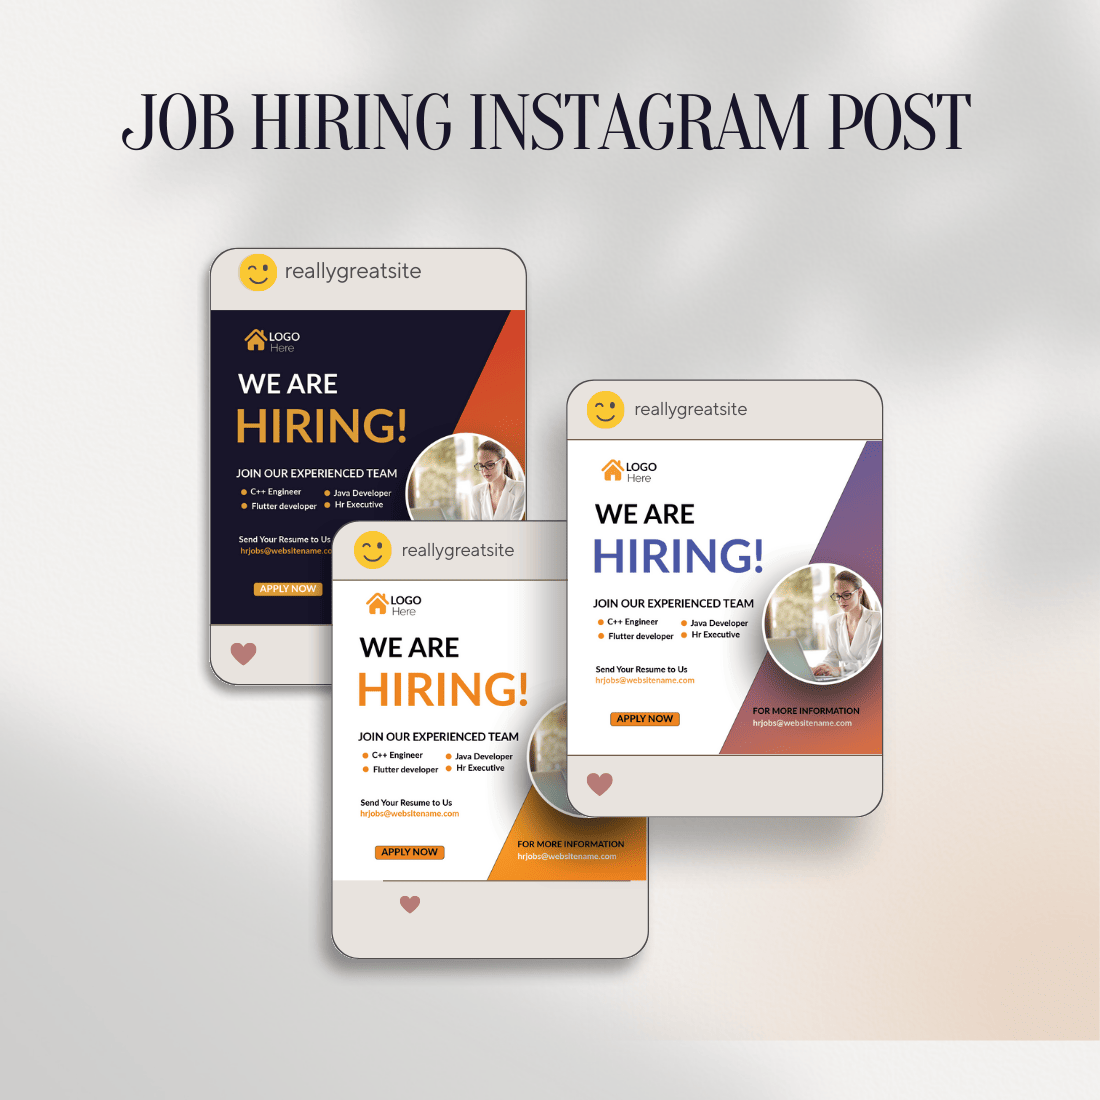 We are hiring employee job social media banner post template preview image.